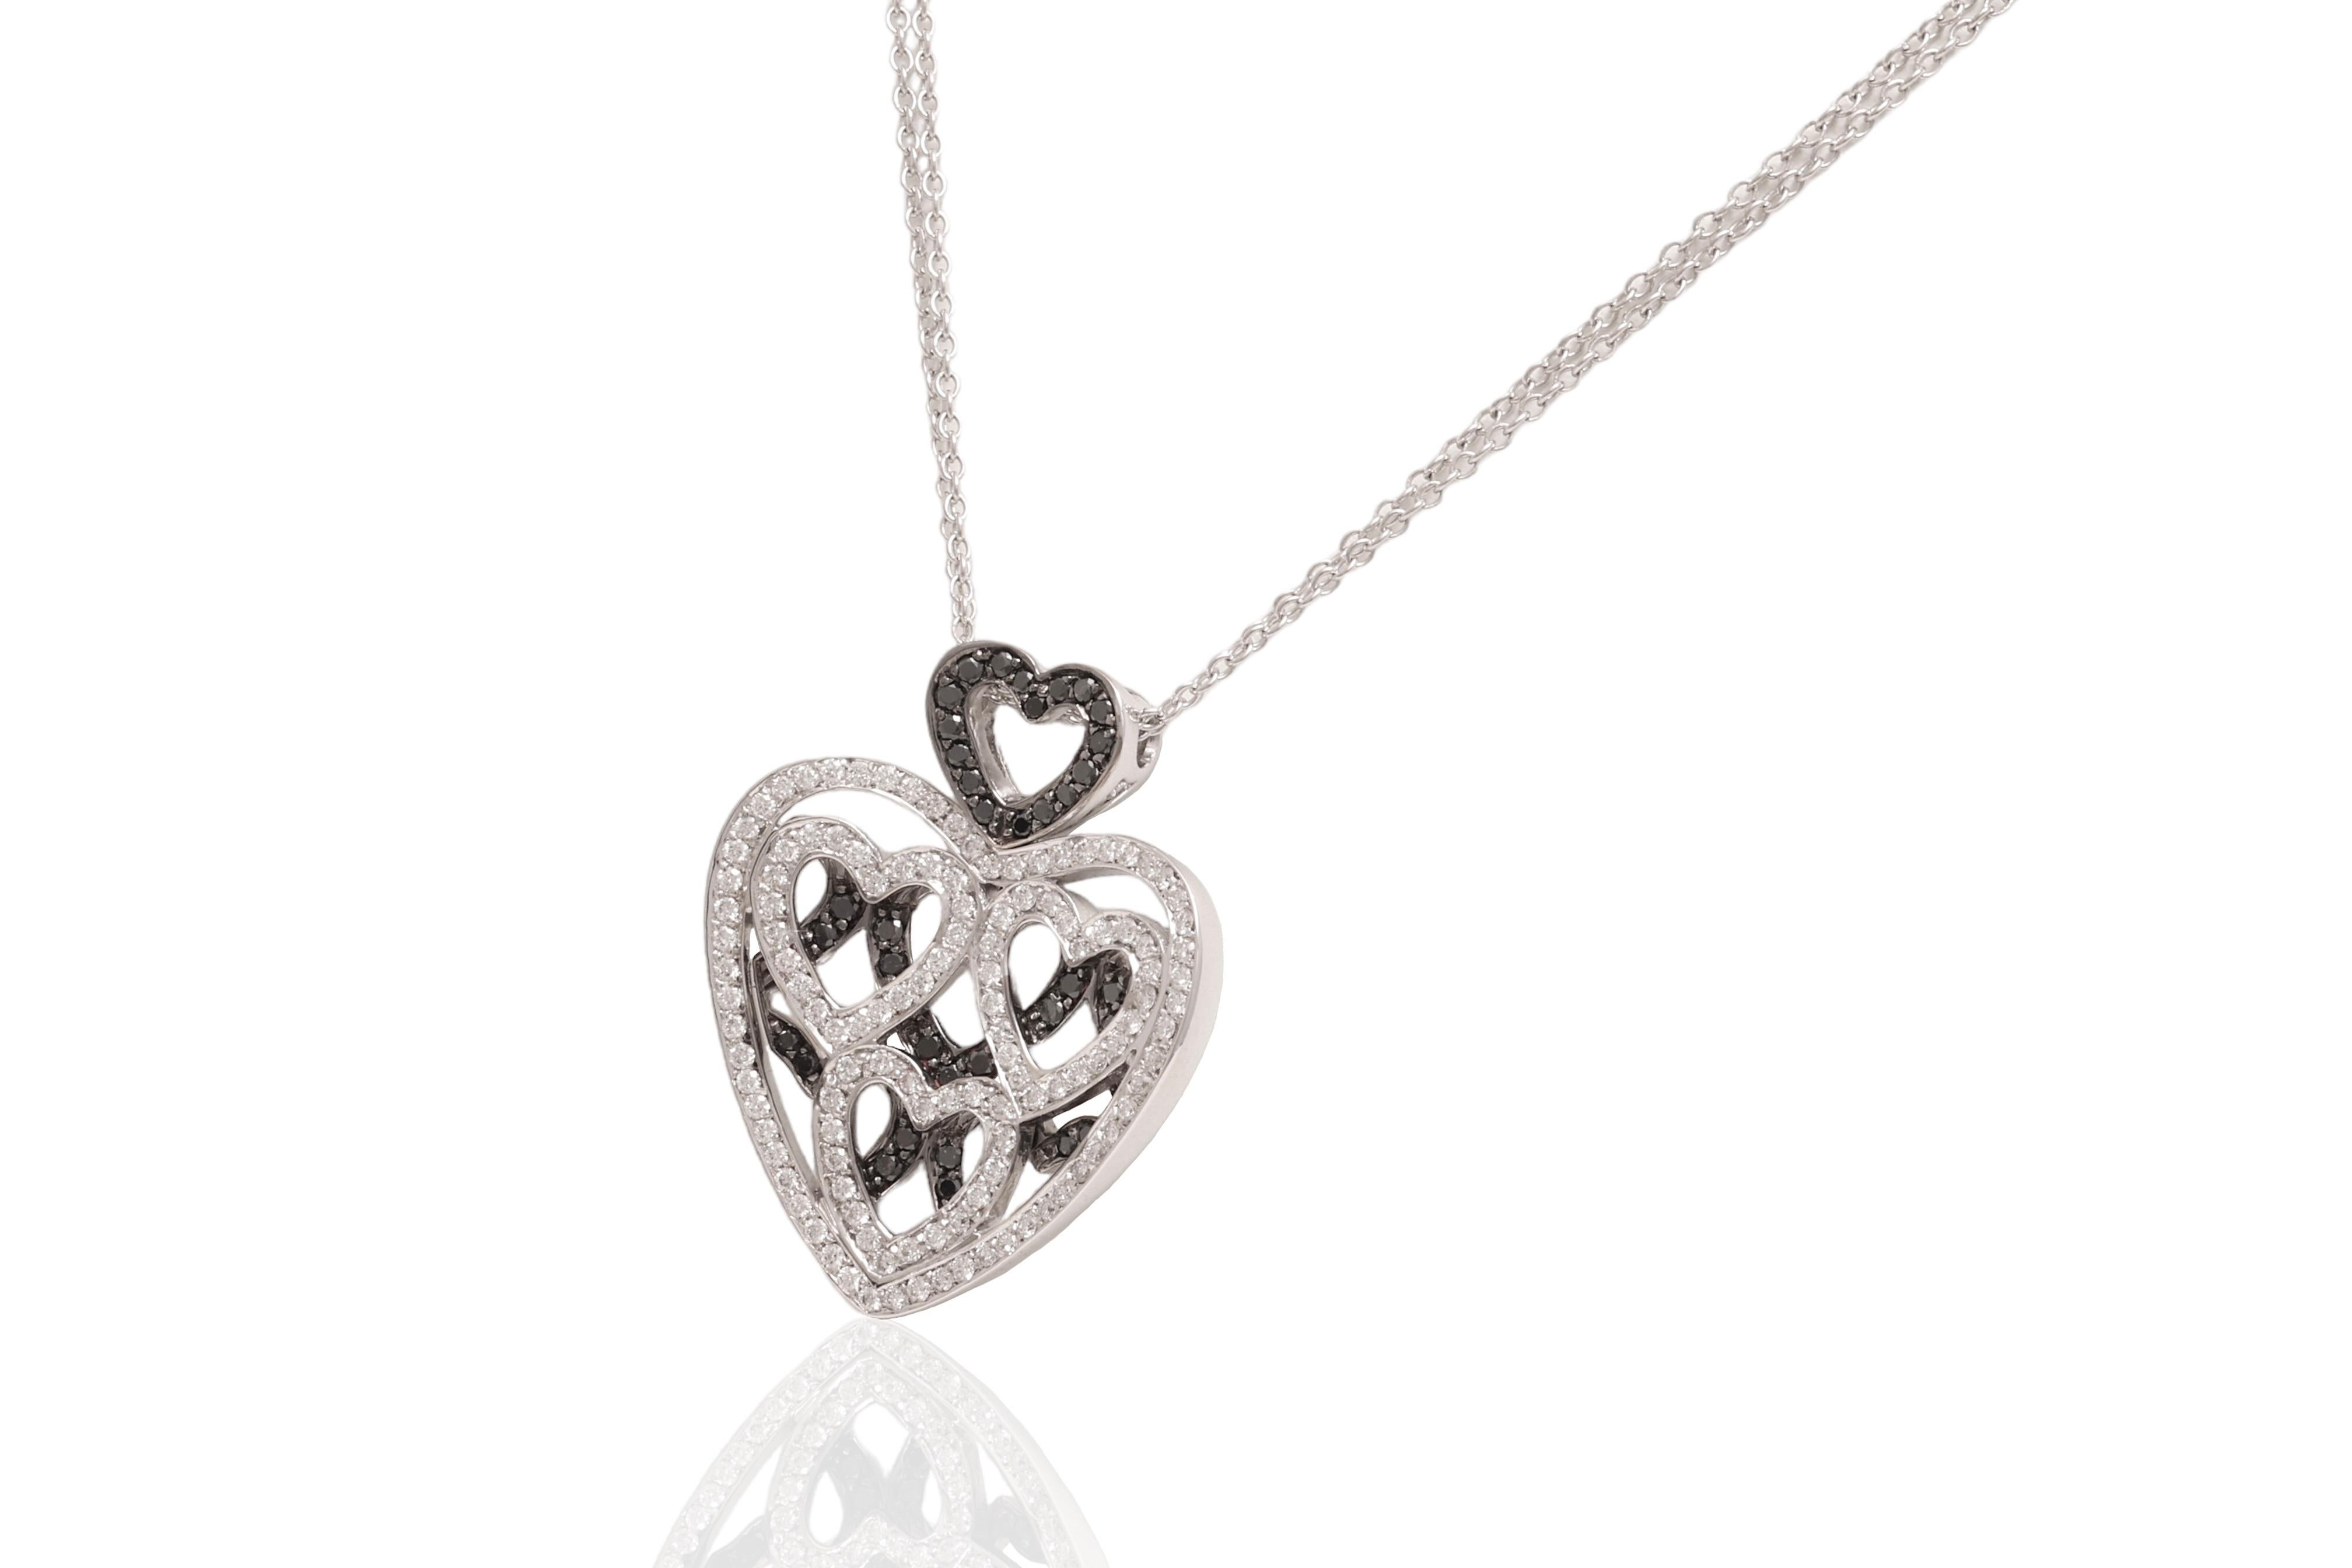 Gorgeous 18 kt. White Gold Heart Necklace With 1 ct. White & Black Diamonds 

A real Piece of Art

Diamonds: White brilliant cut diamonds, together approx. 0.69 ct. 
black diamonds, together approx. 0.31 ct.

Material: 18 kt. Solid white